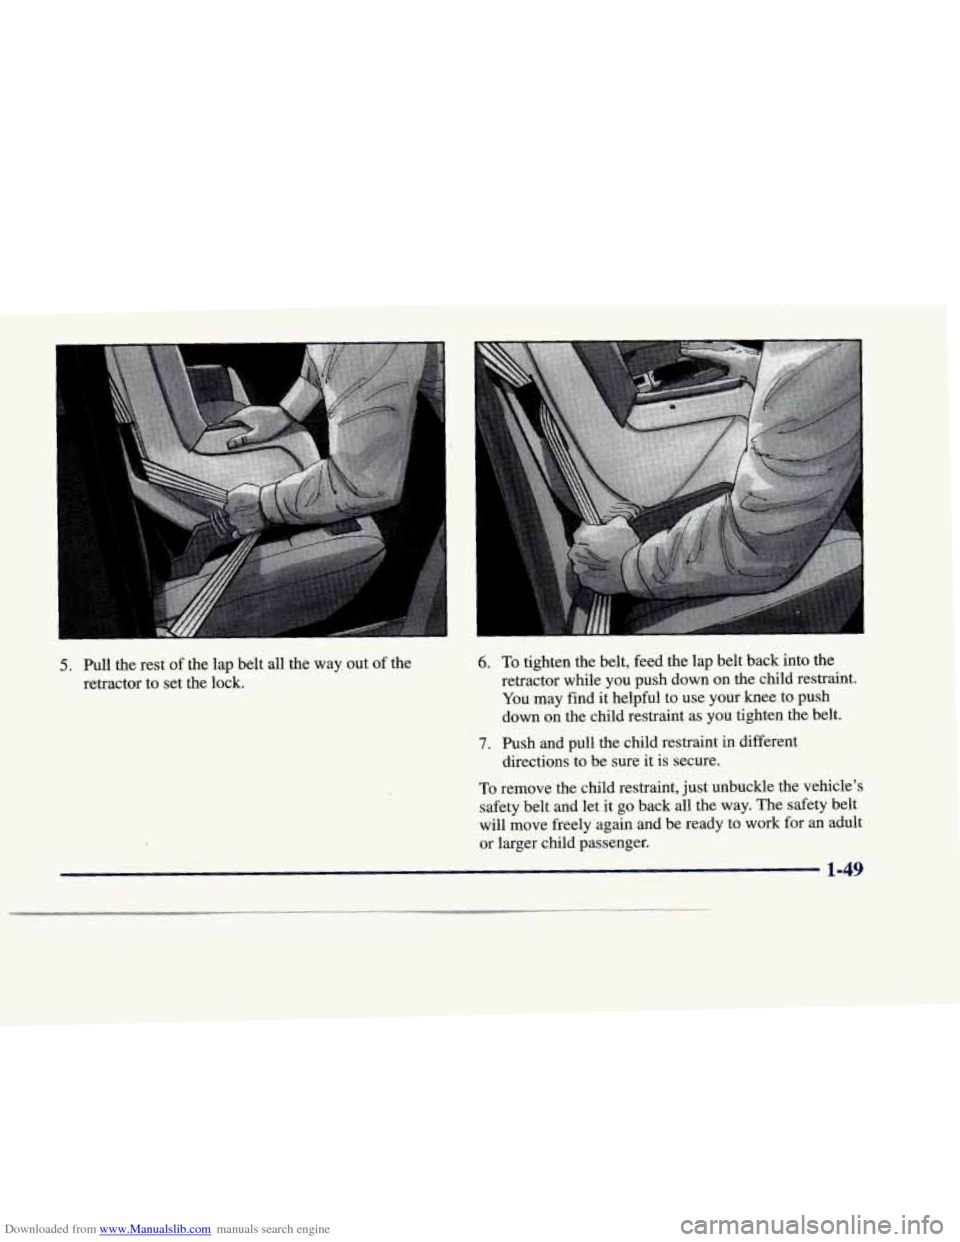 CADILLAC DEVILLE 1998 7.G Owners Manual Downloaded from www.Manualslib.com manuals search engine 5. Pull  the  rest of the lap  belt  all the way  out  of  the 
retractor  to set  the  lock. 6. 
7. 
To  tighten  the  belt,  feed  the  lap b